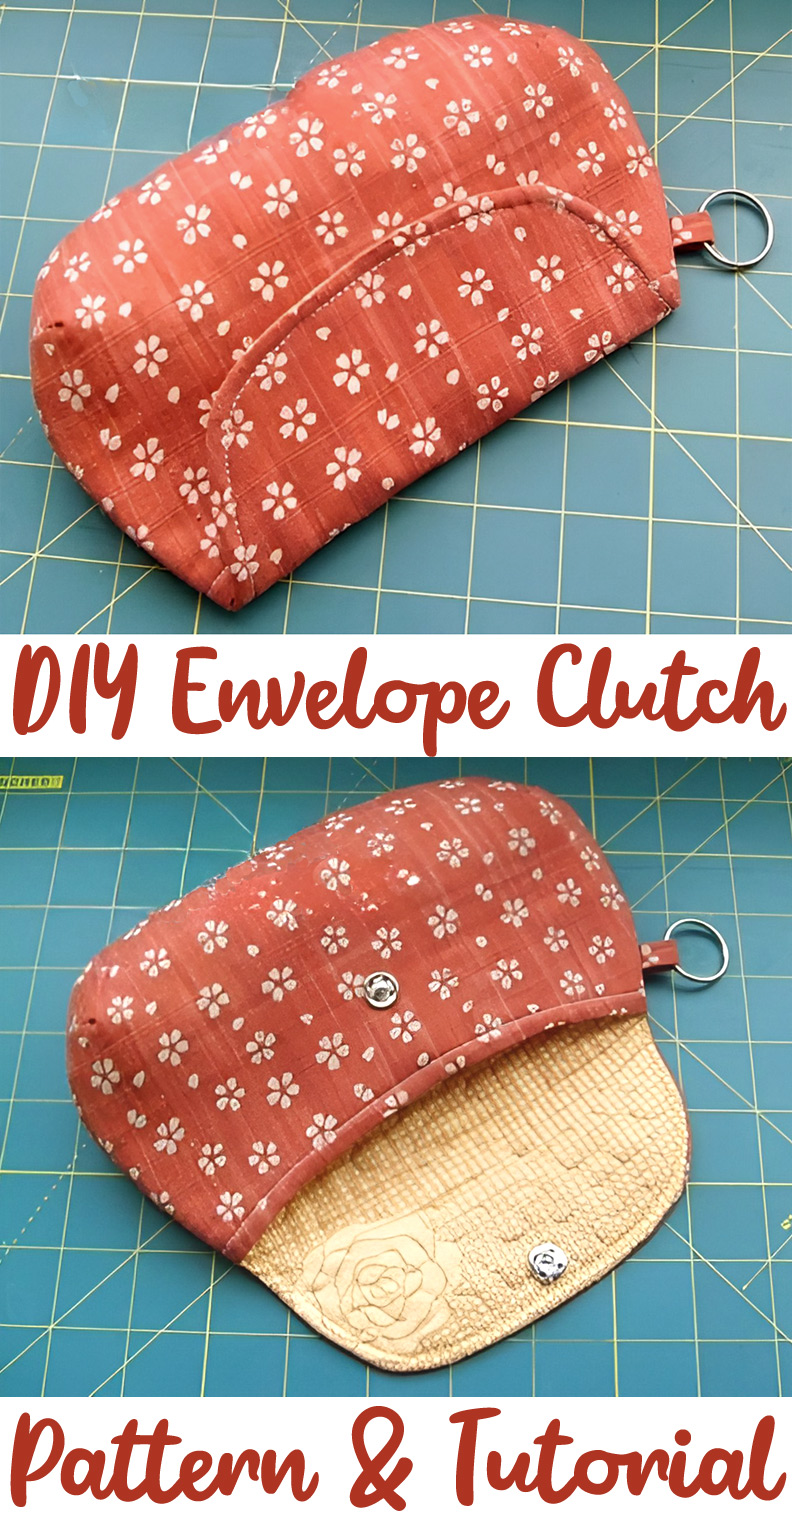 Make it Yours' One Piece Clutch Bag Pattern and SEWING CONTEST | So Sew Easy